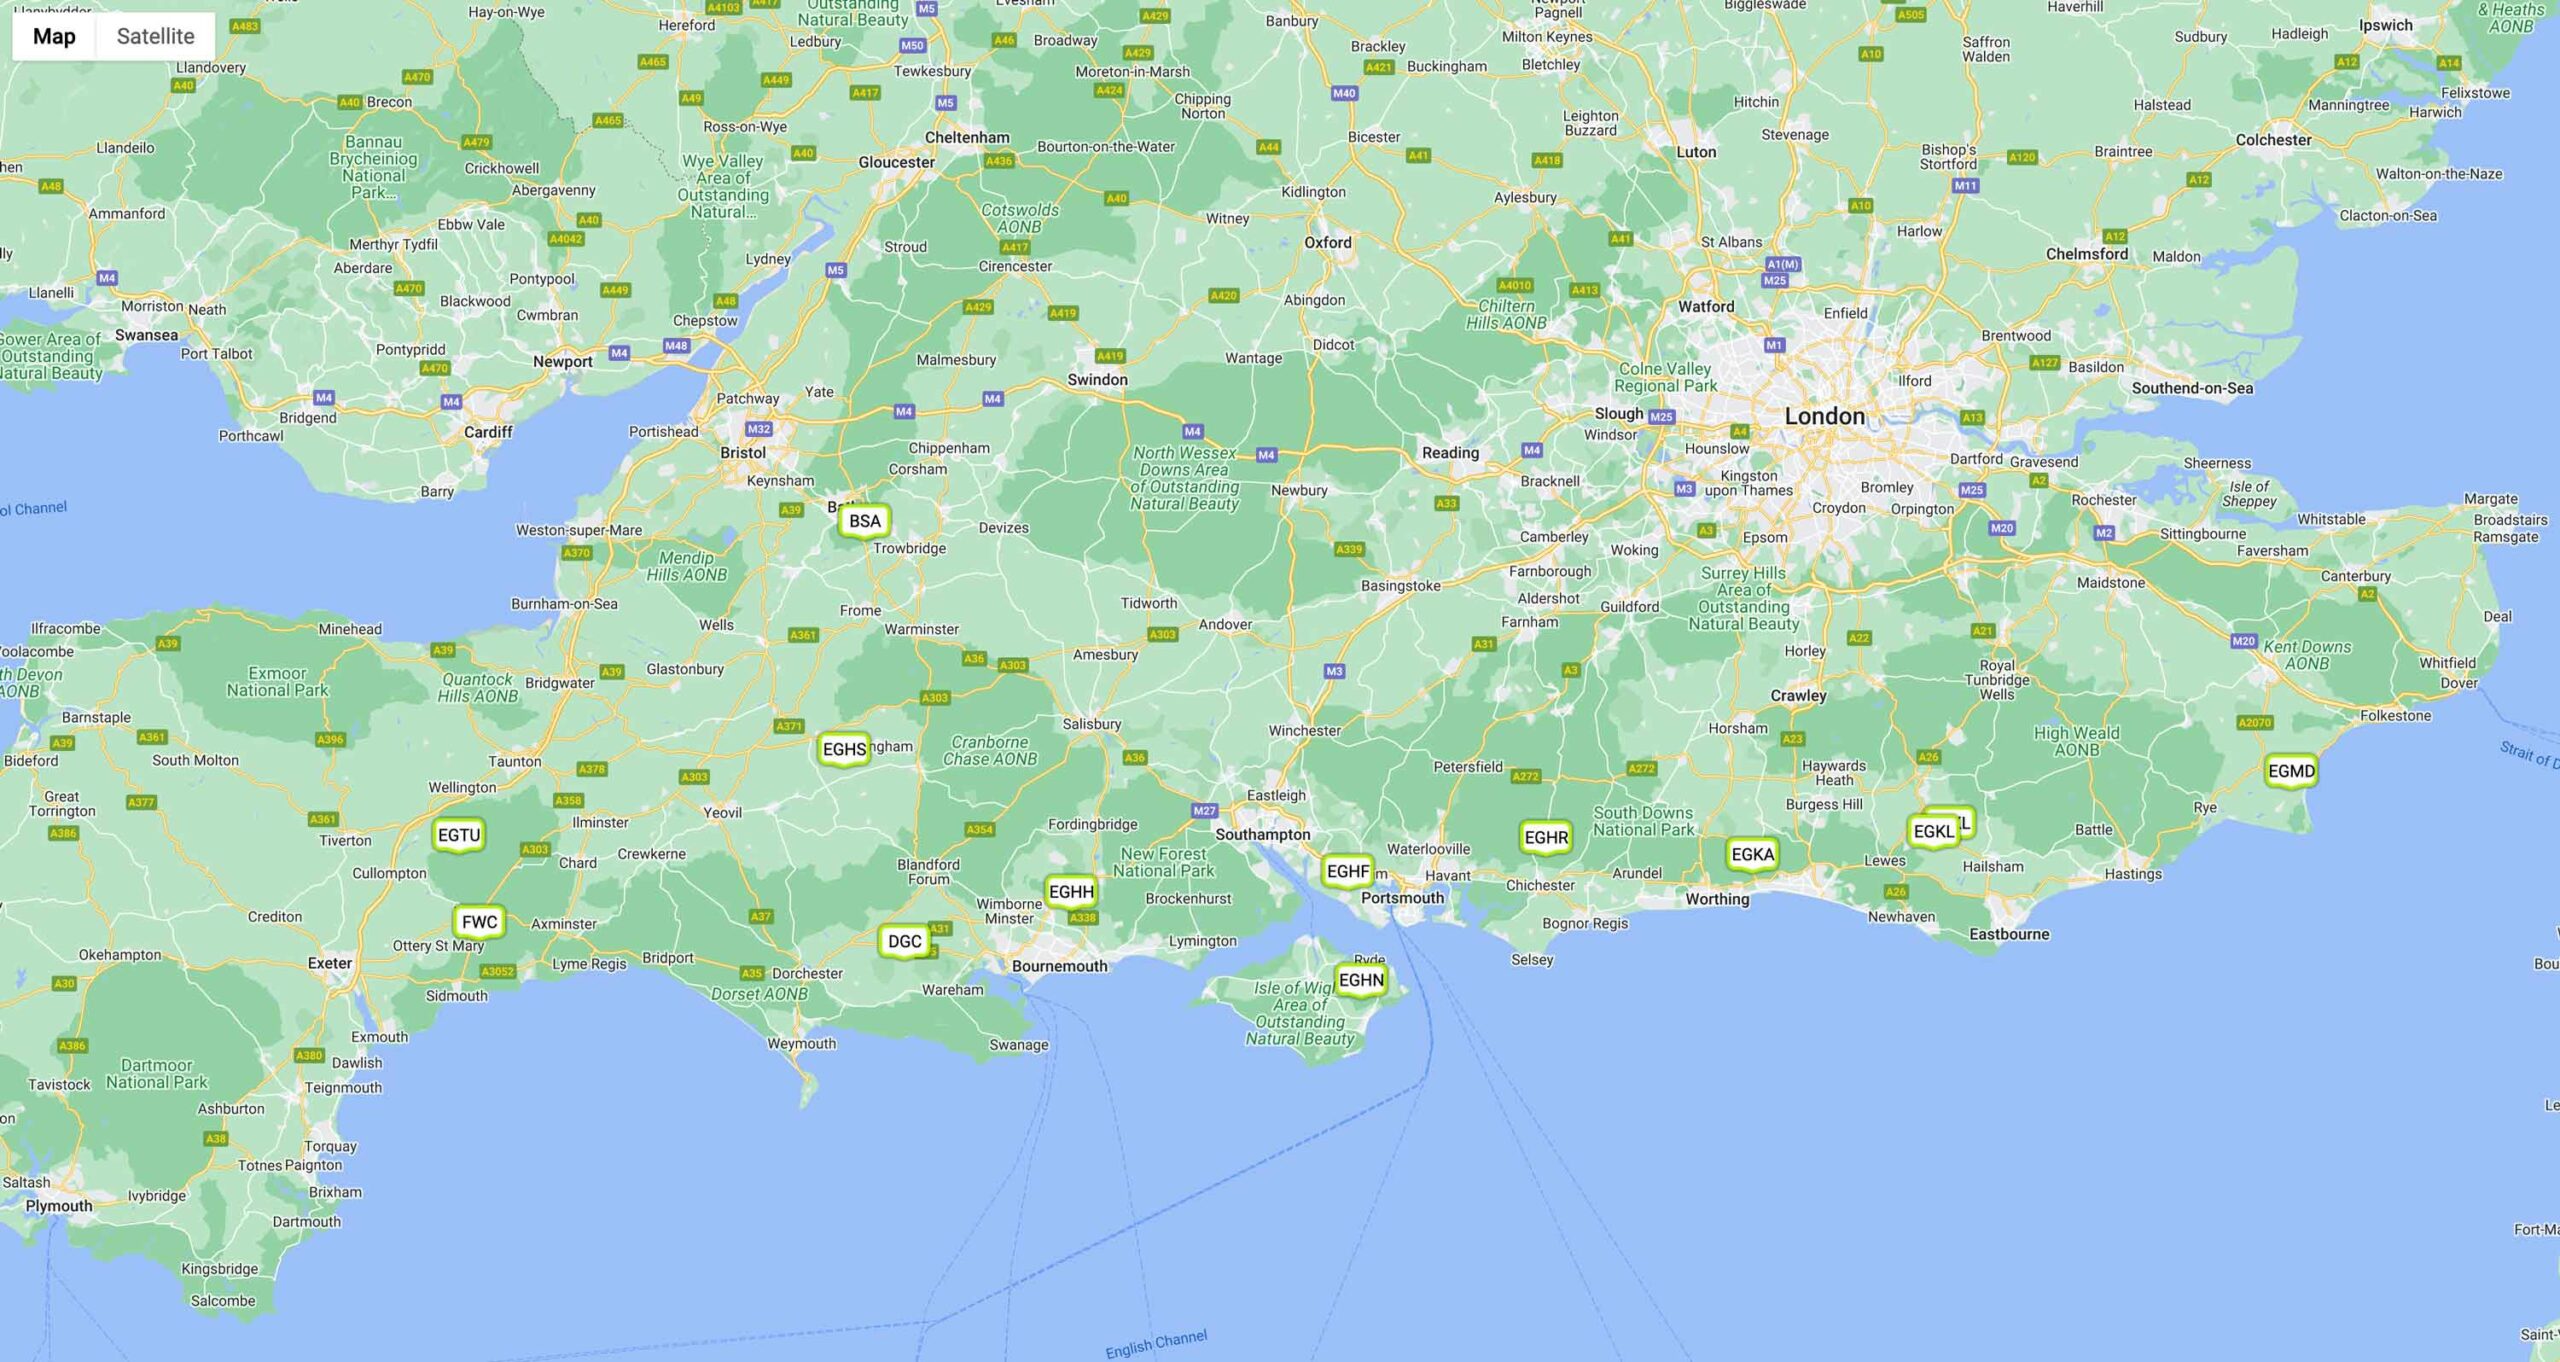 Aerovolt's network is rapidly expanding though it's concentrated in the south of England for now